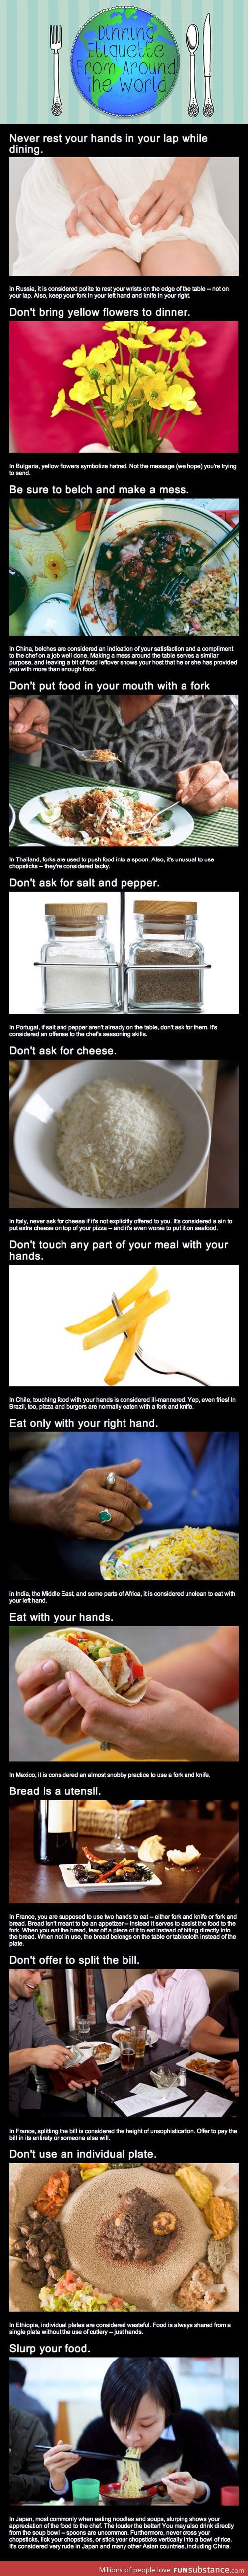 Dinning etiquette from around the world